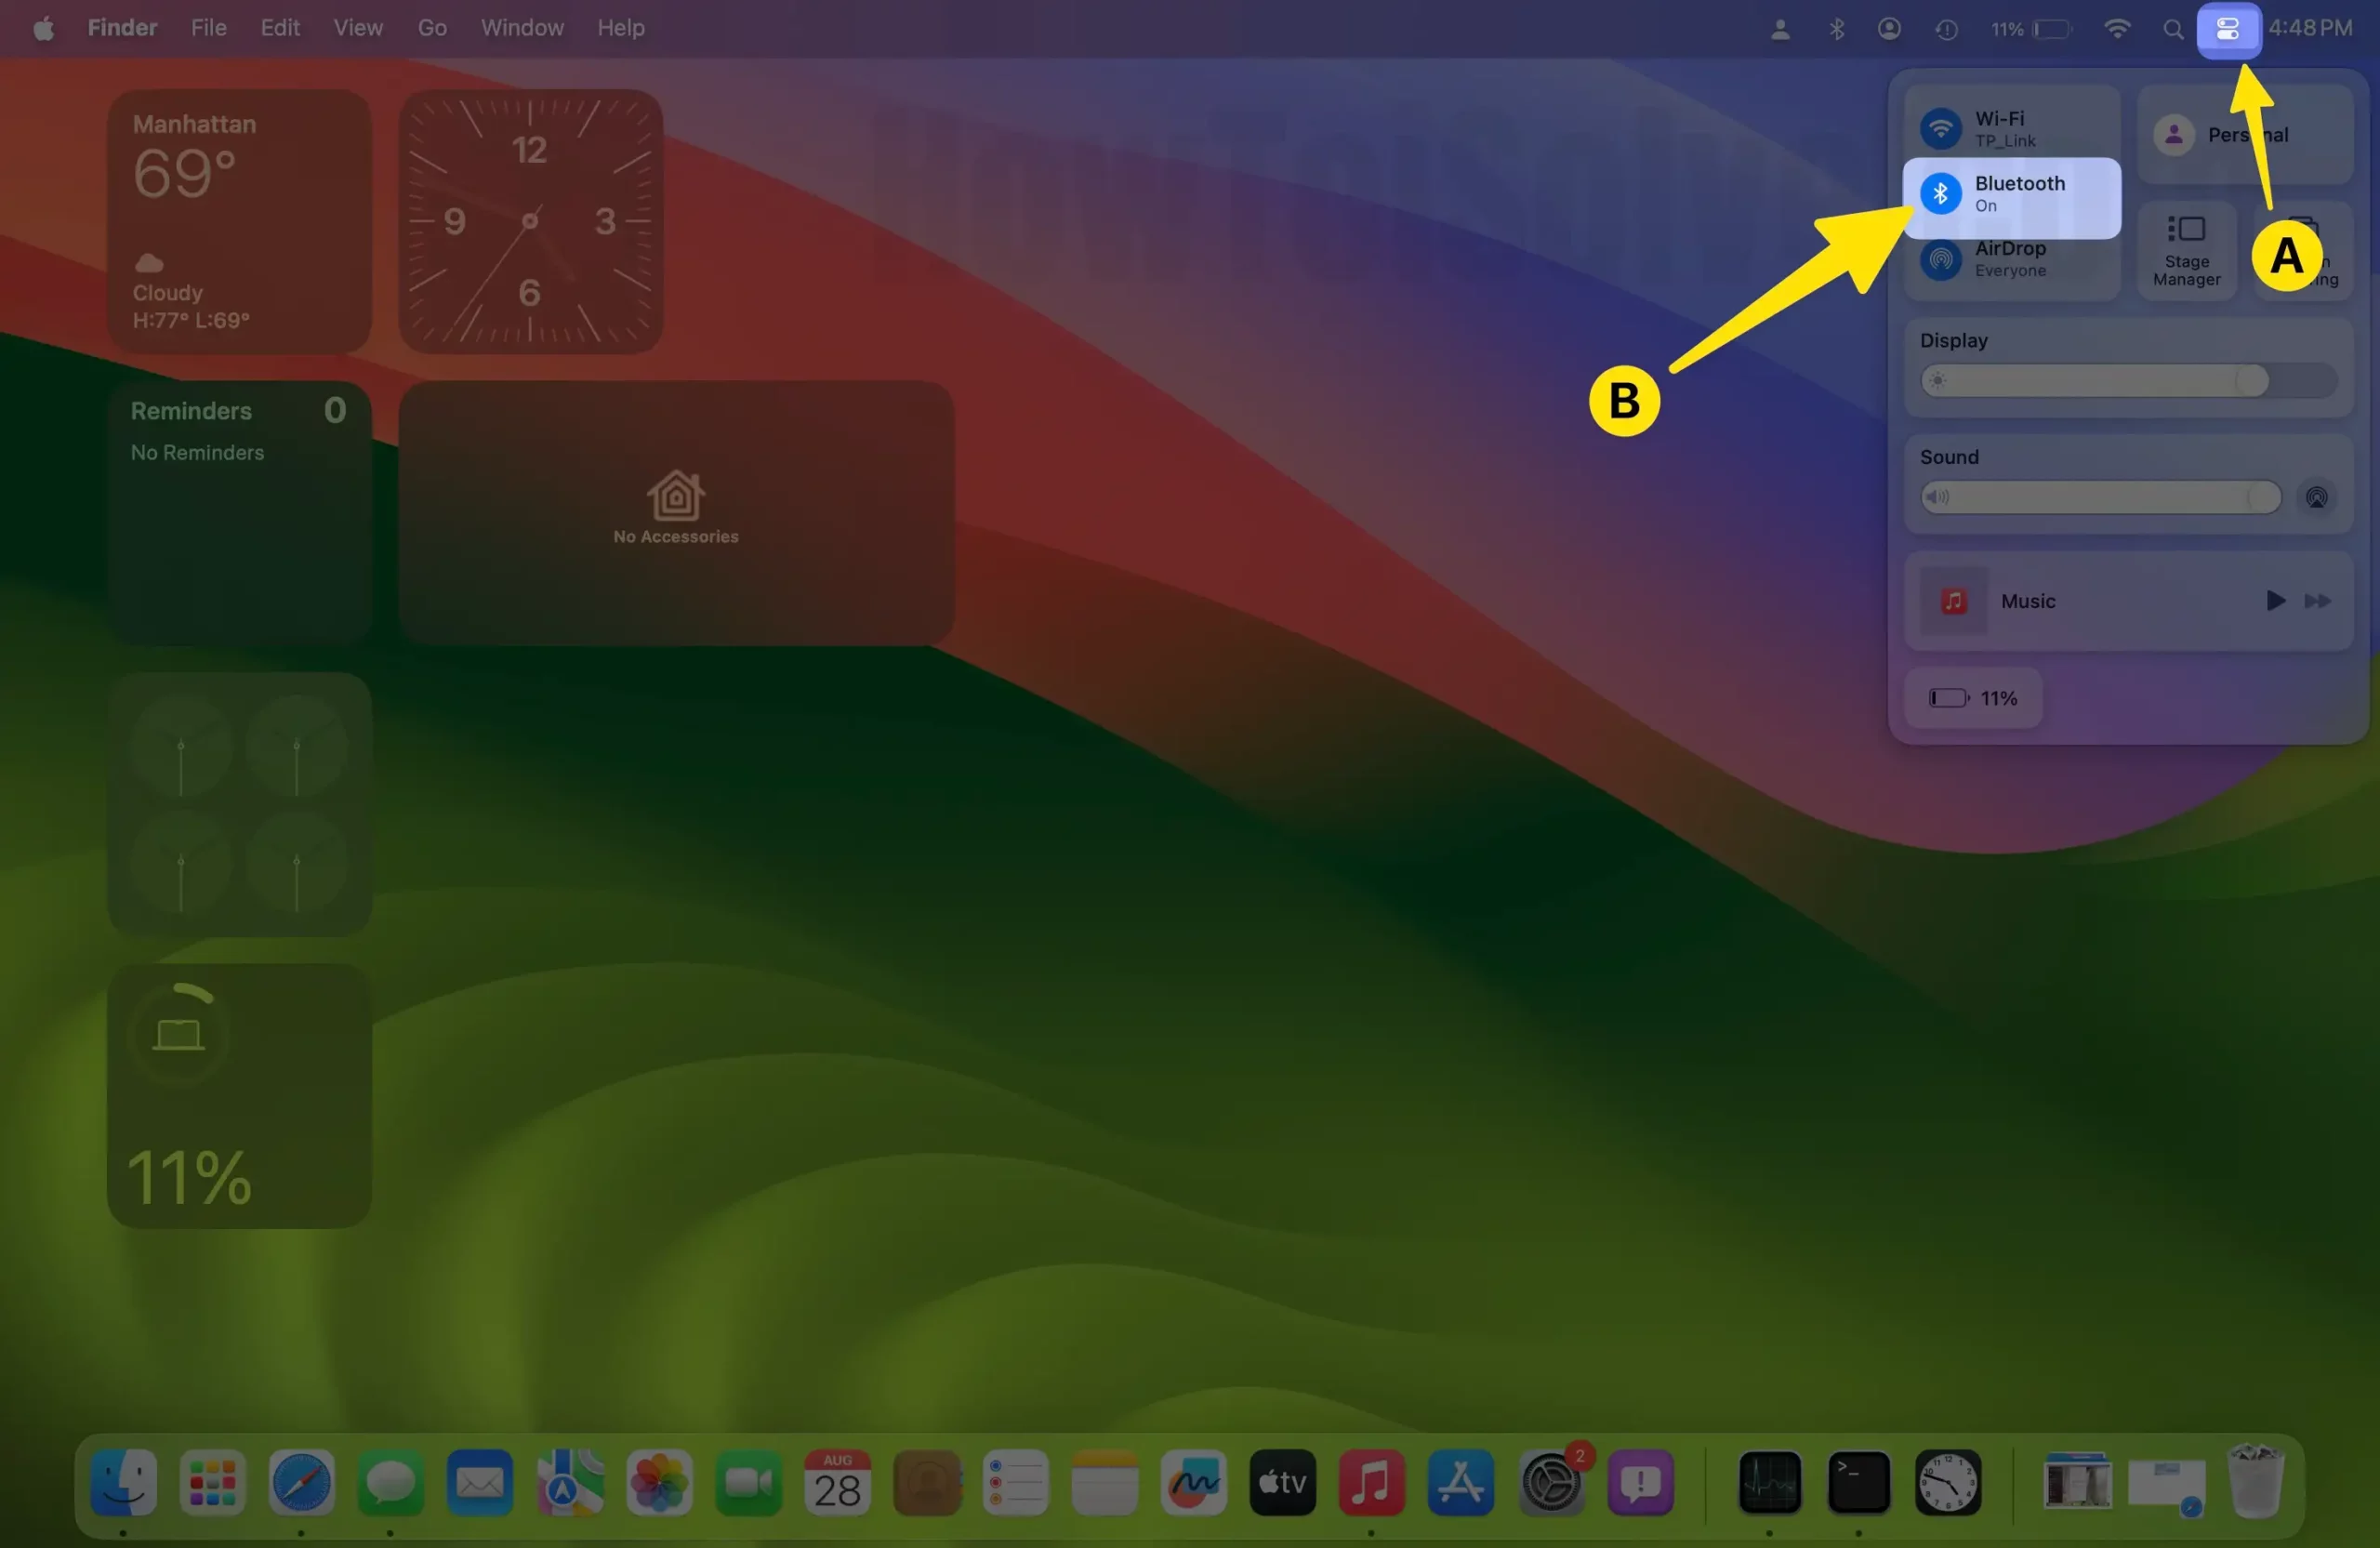 Open Bluetooth from control center on Mac